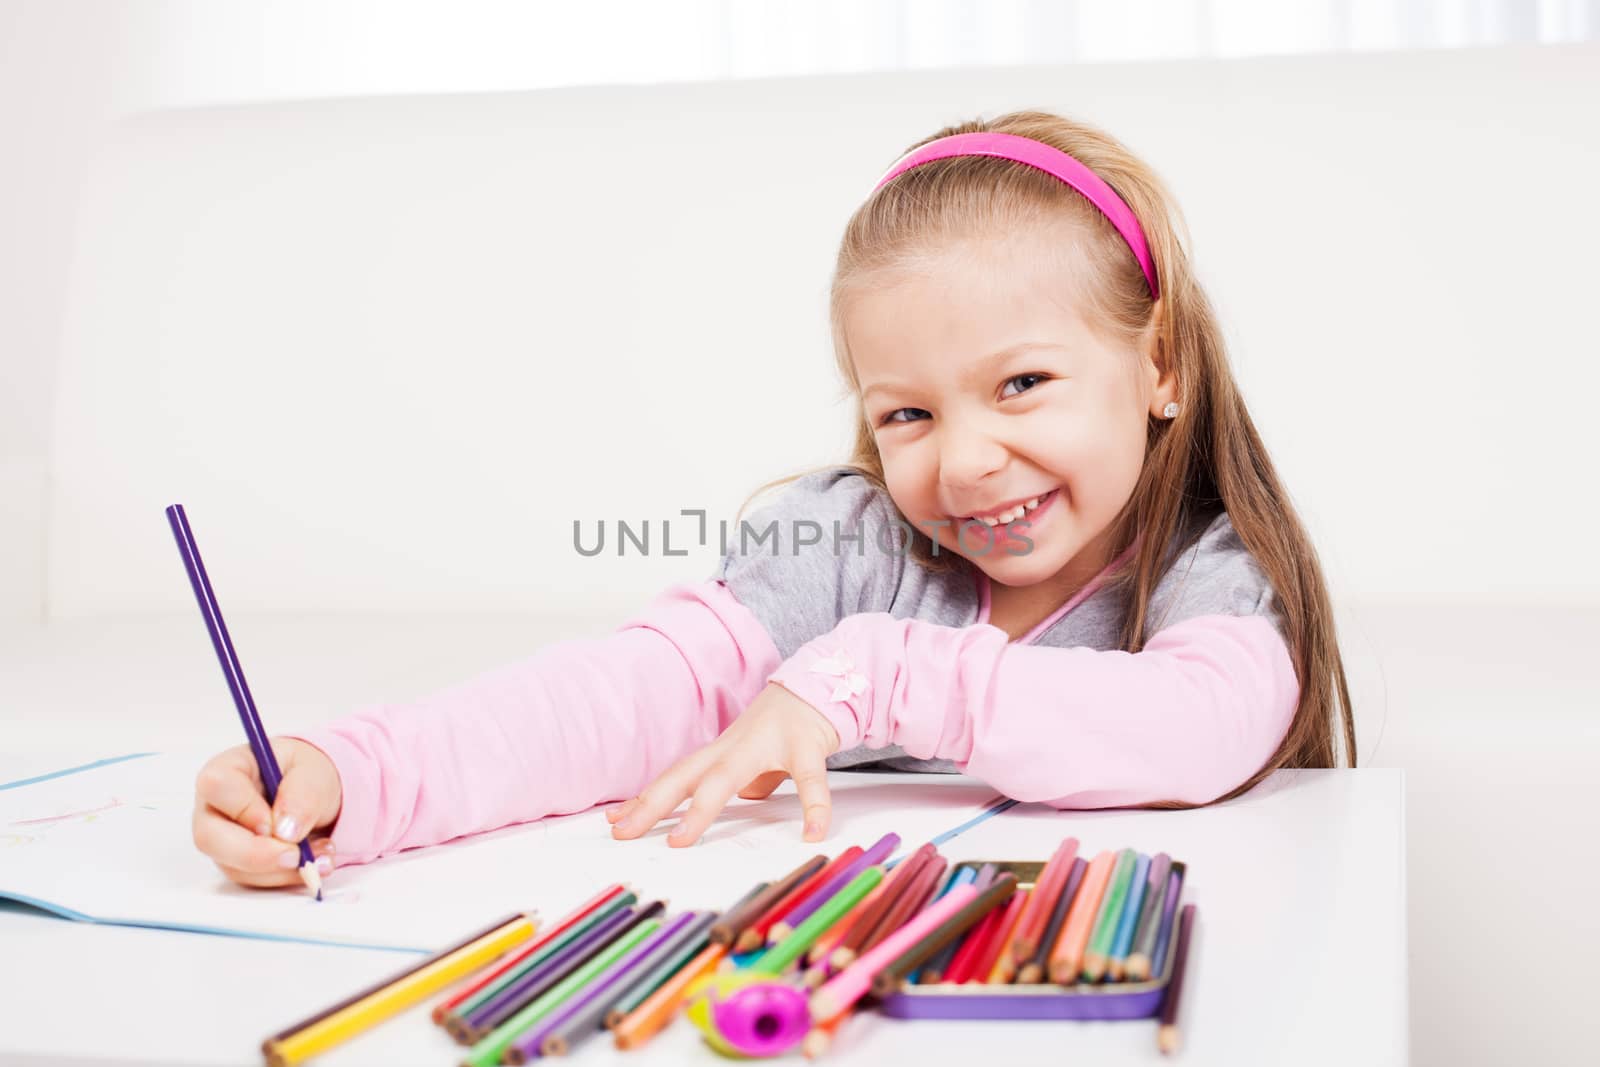 Little Girl With Colored Pencils  by MilanMarkovic78